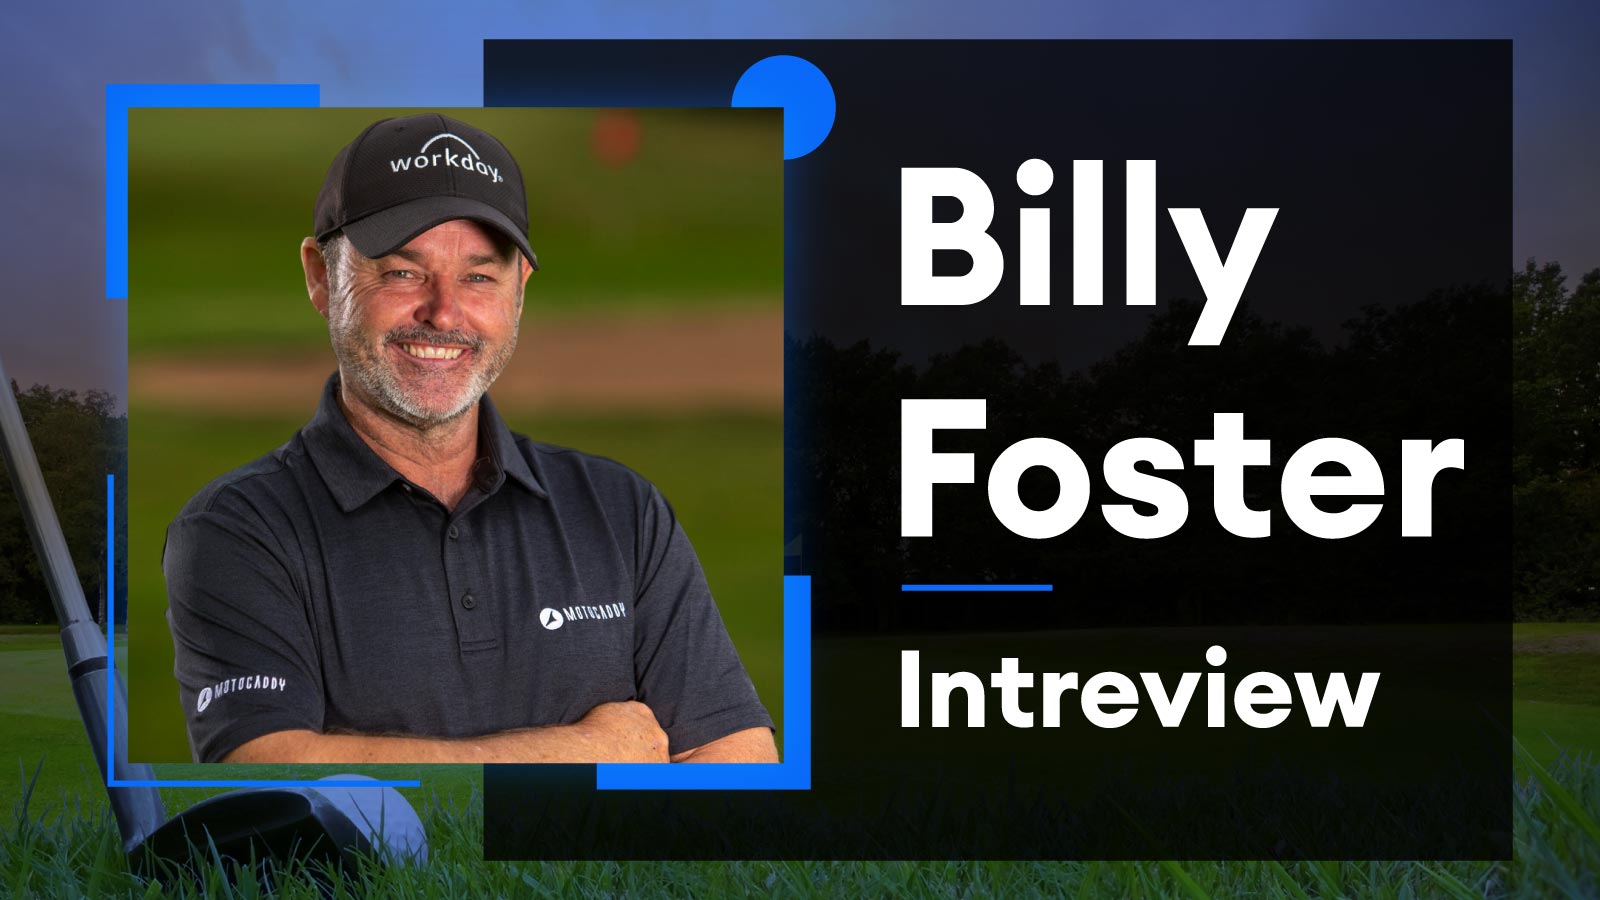 Exclusive Interview With Billy Foster: 'Matt Fitzpatrick had a disappointing start to the season'